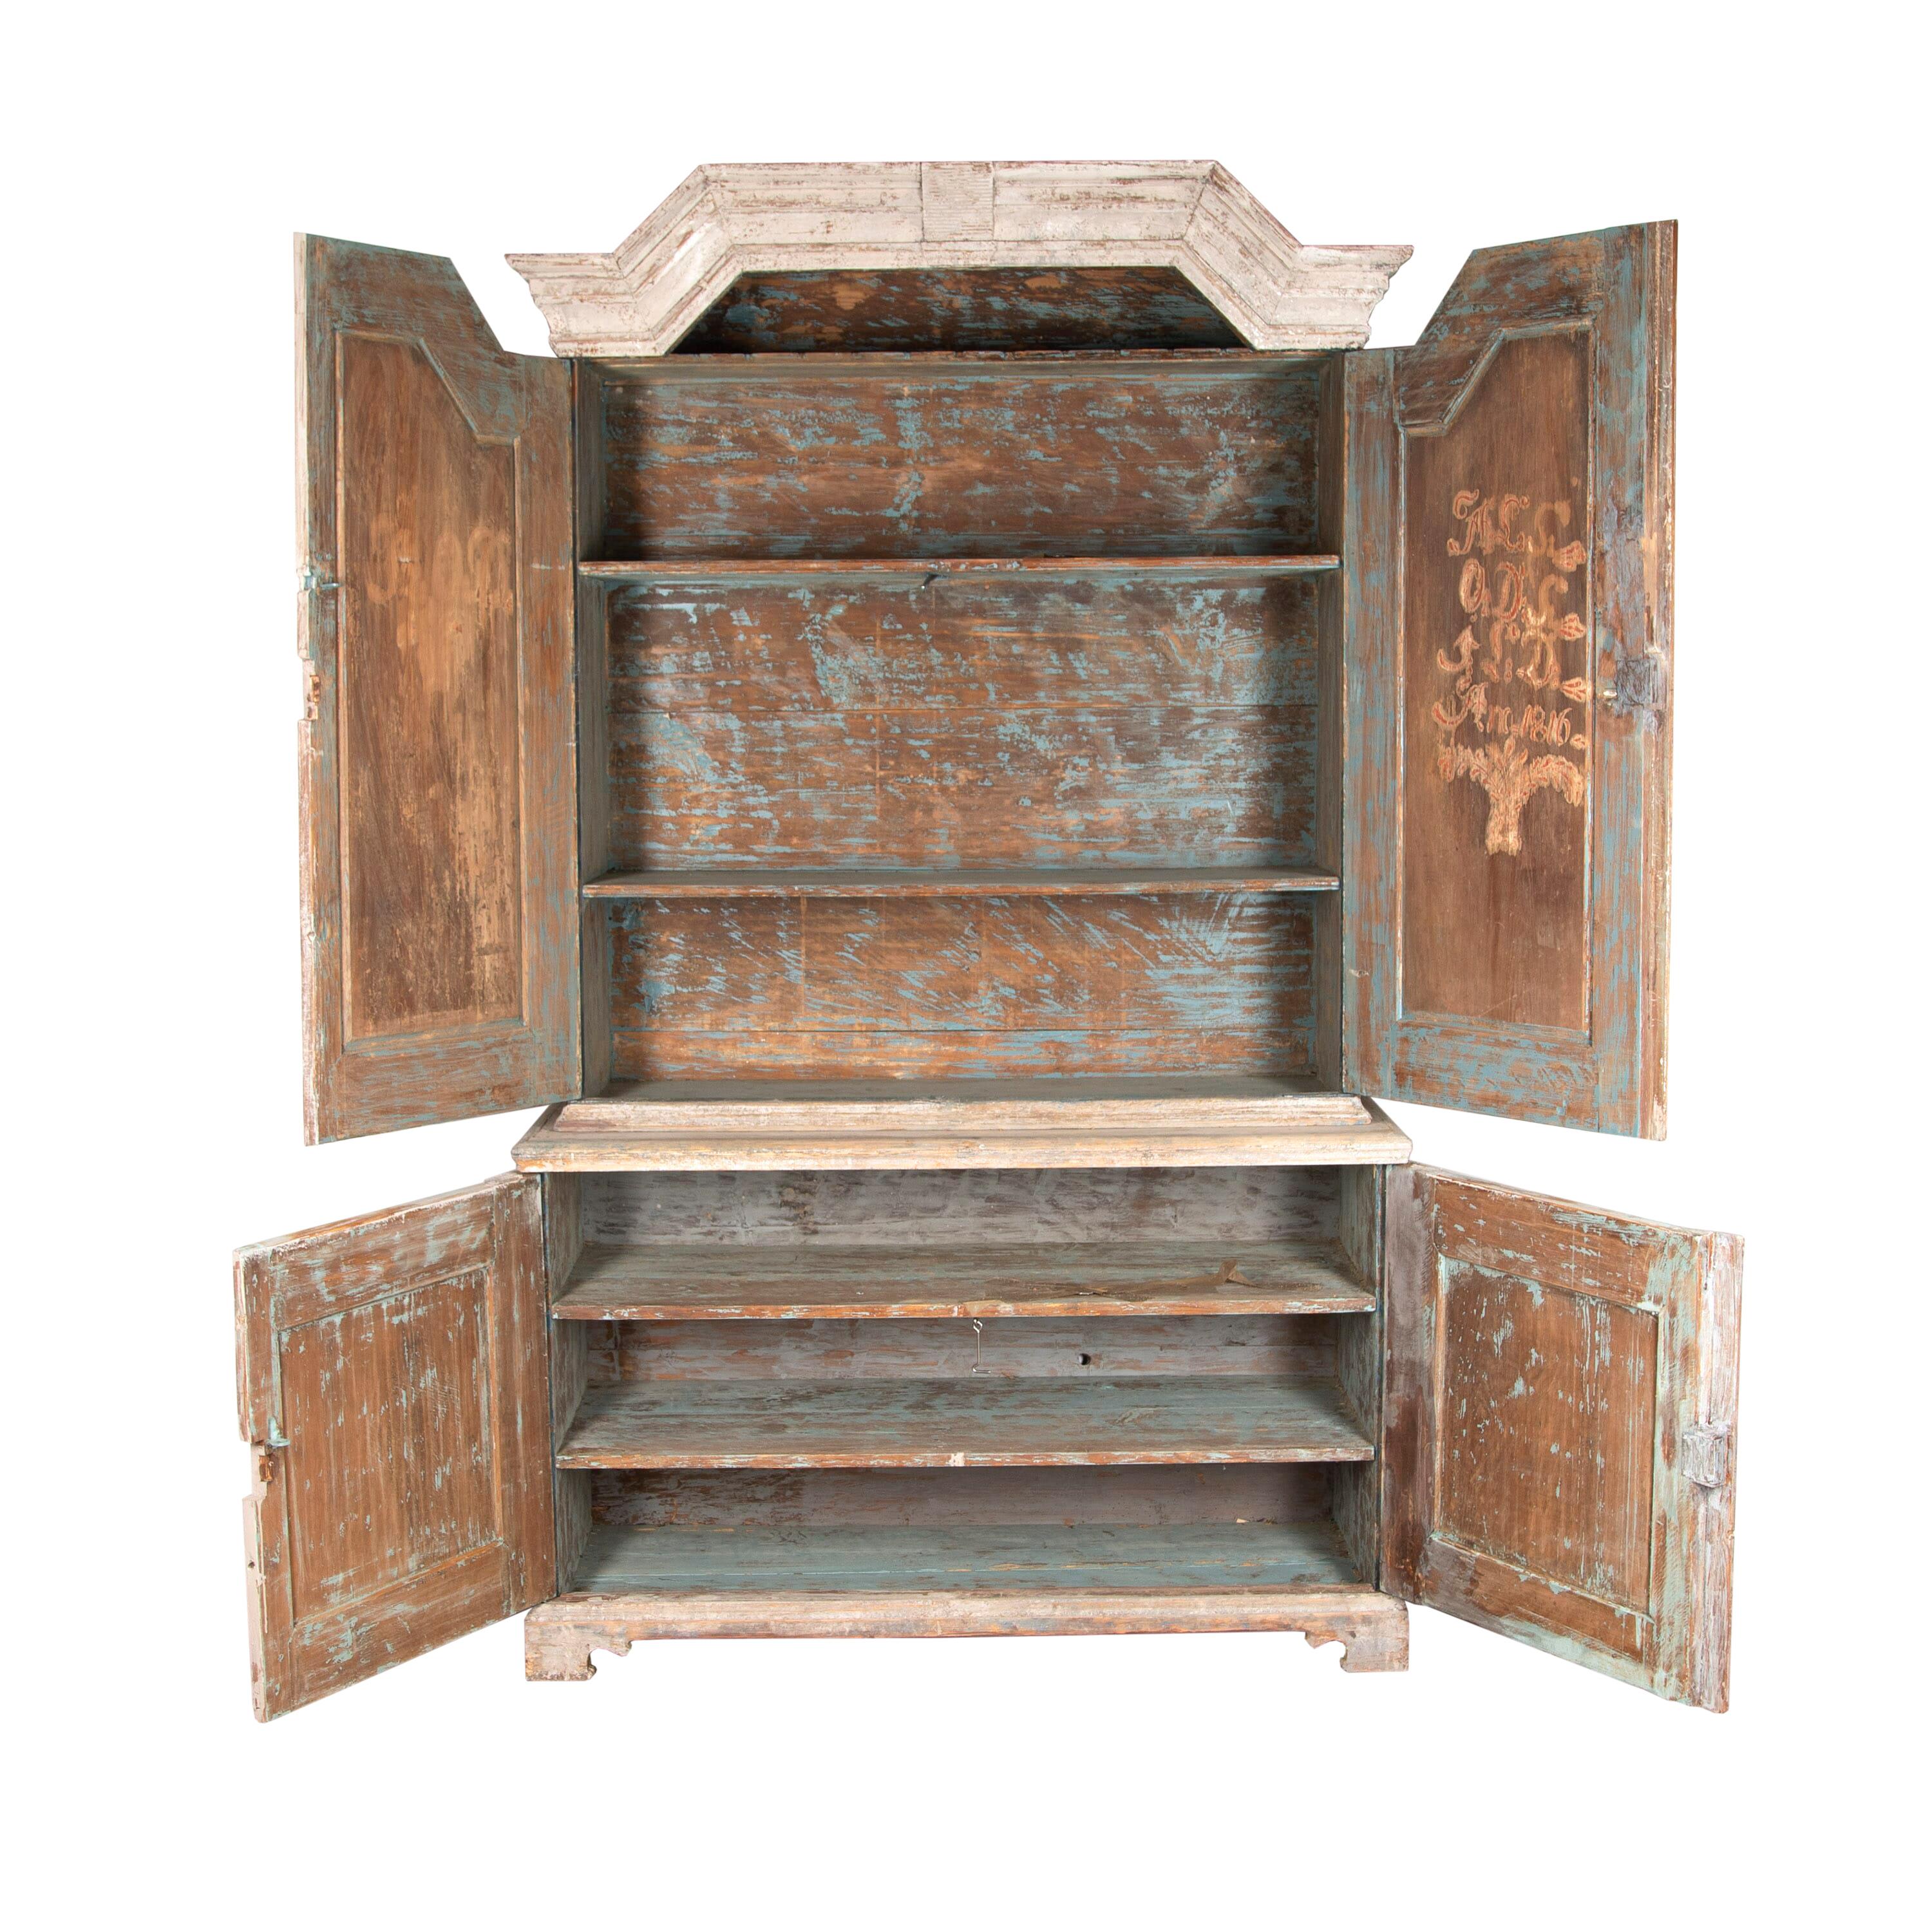 Early 19th century Gustavian cupboard with a decorative carved pediment. Featuring two doors with reeded detailing that open to useful storage. Below are two further doors with further reeded detailing to the front, opening to further storage. This